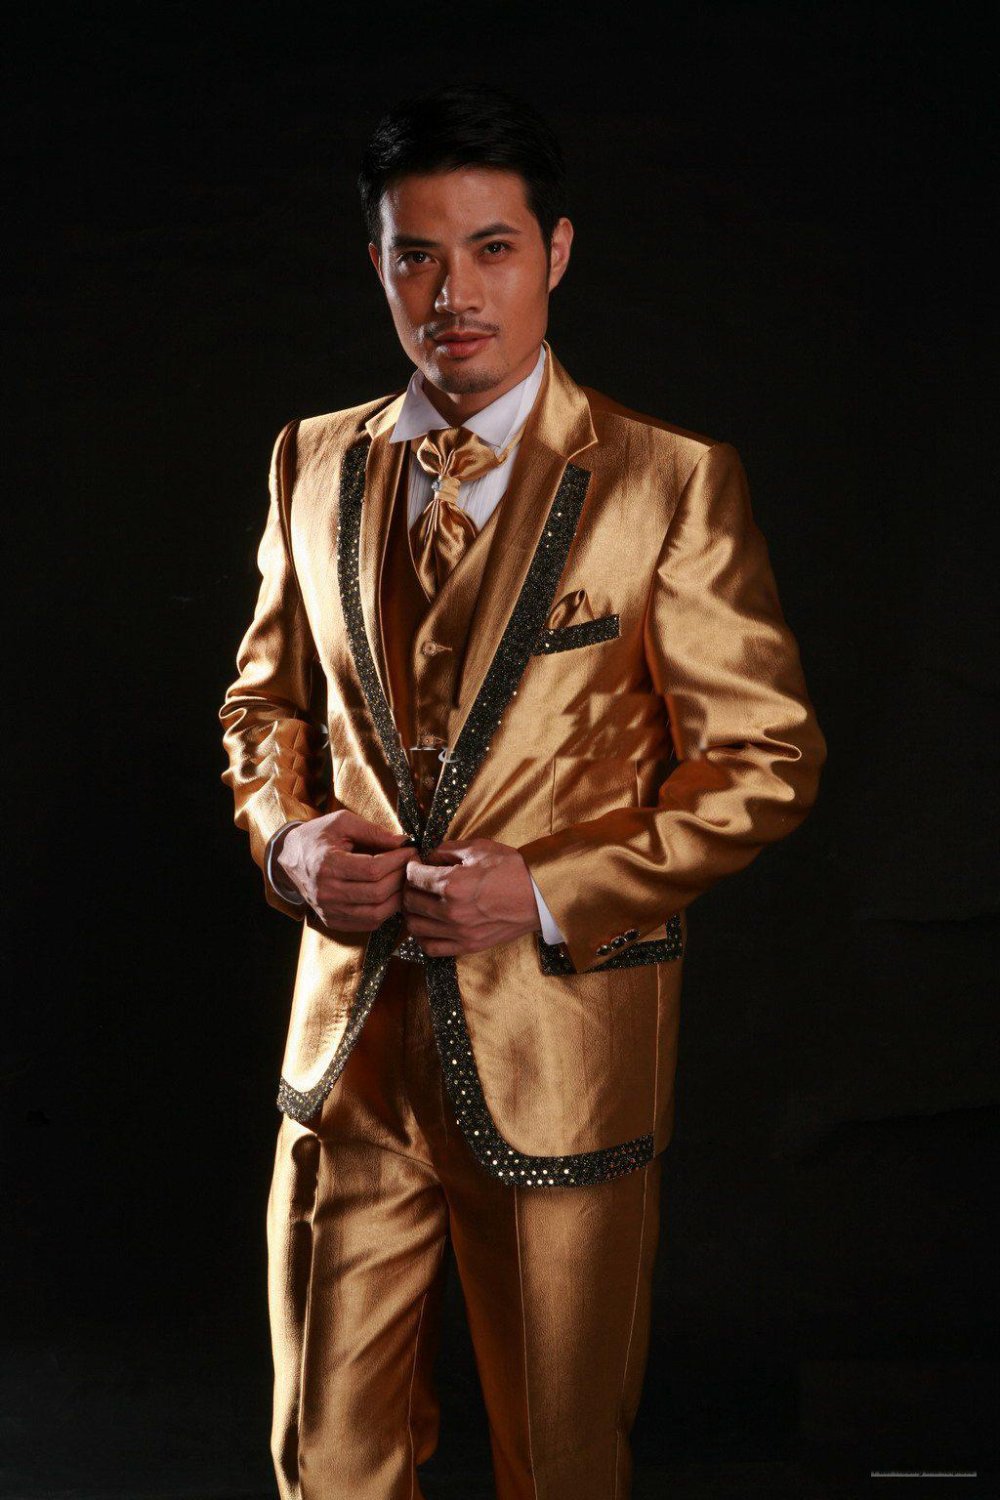 2013 Brand New Men's Suits Gold Wedding Tuxedo Formality Suit Lounge Suit BEST QUALITY